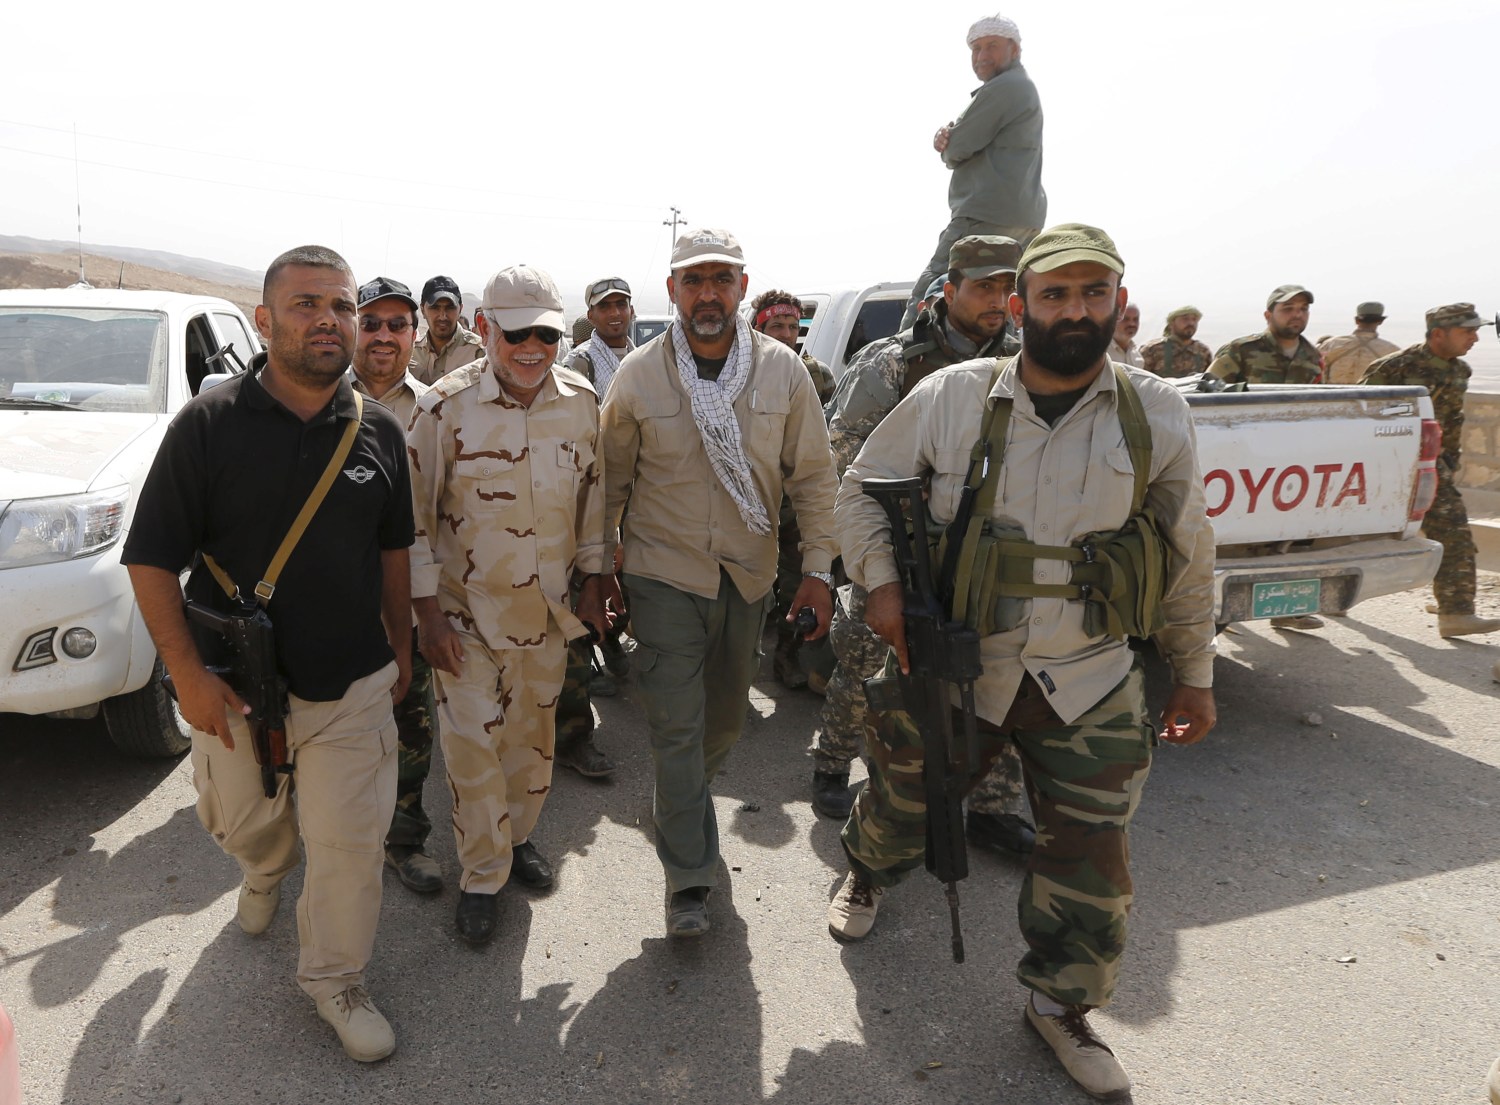 Head of the Badr Organisation Hadi al-Amiri (C, L) walks with Shi'ite fighters in Makhoul mountains, north of Baiji, October 17, 2015. Iraqi forces and Shi'ite militia fighters recaptured most of the countrys largest oil refinery from Islamic State militants on Thursday, security officials said. The report could not be independently confirmed because it is too dangerous for journalists to enter the battle zone around the refinery near the town of Baiji, about 190 km (120 miles) north of Baghdad.